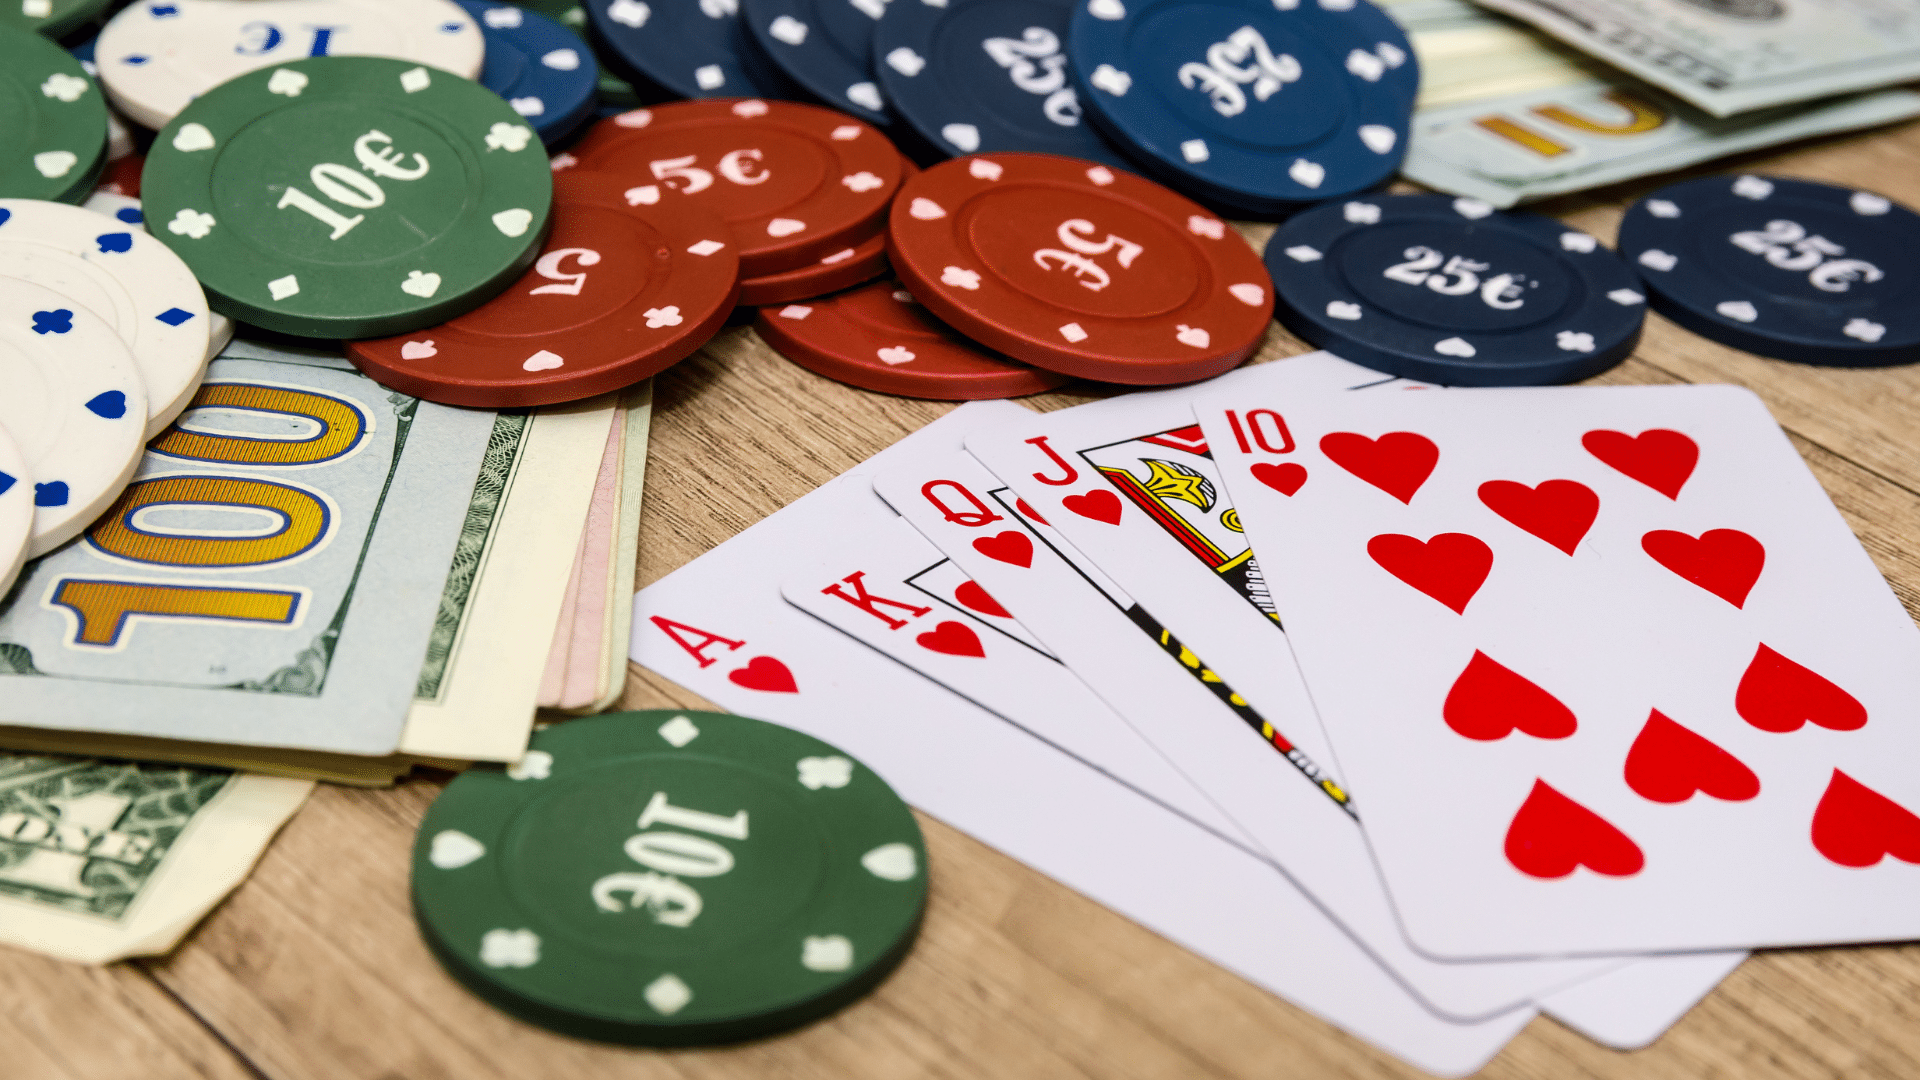 Master the Game: 5 Bankroll Management Tips for Sit and Go Tournaments